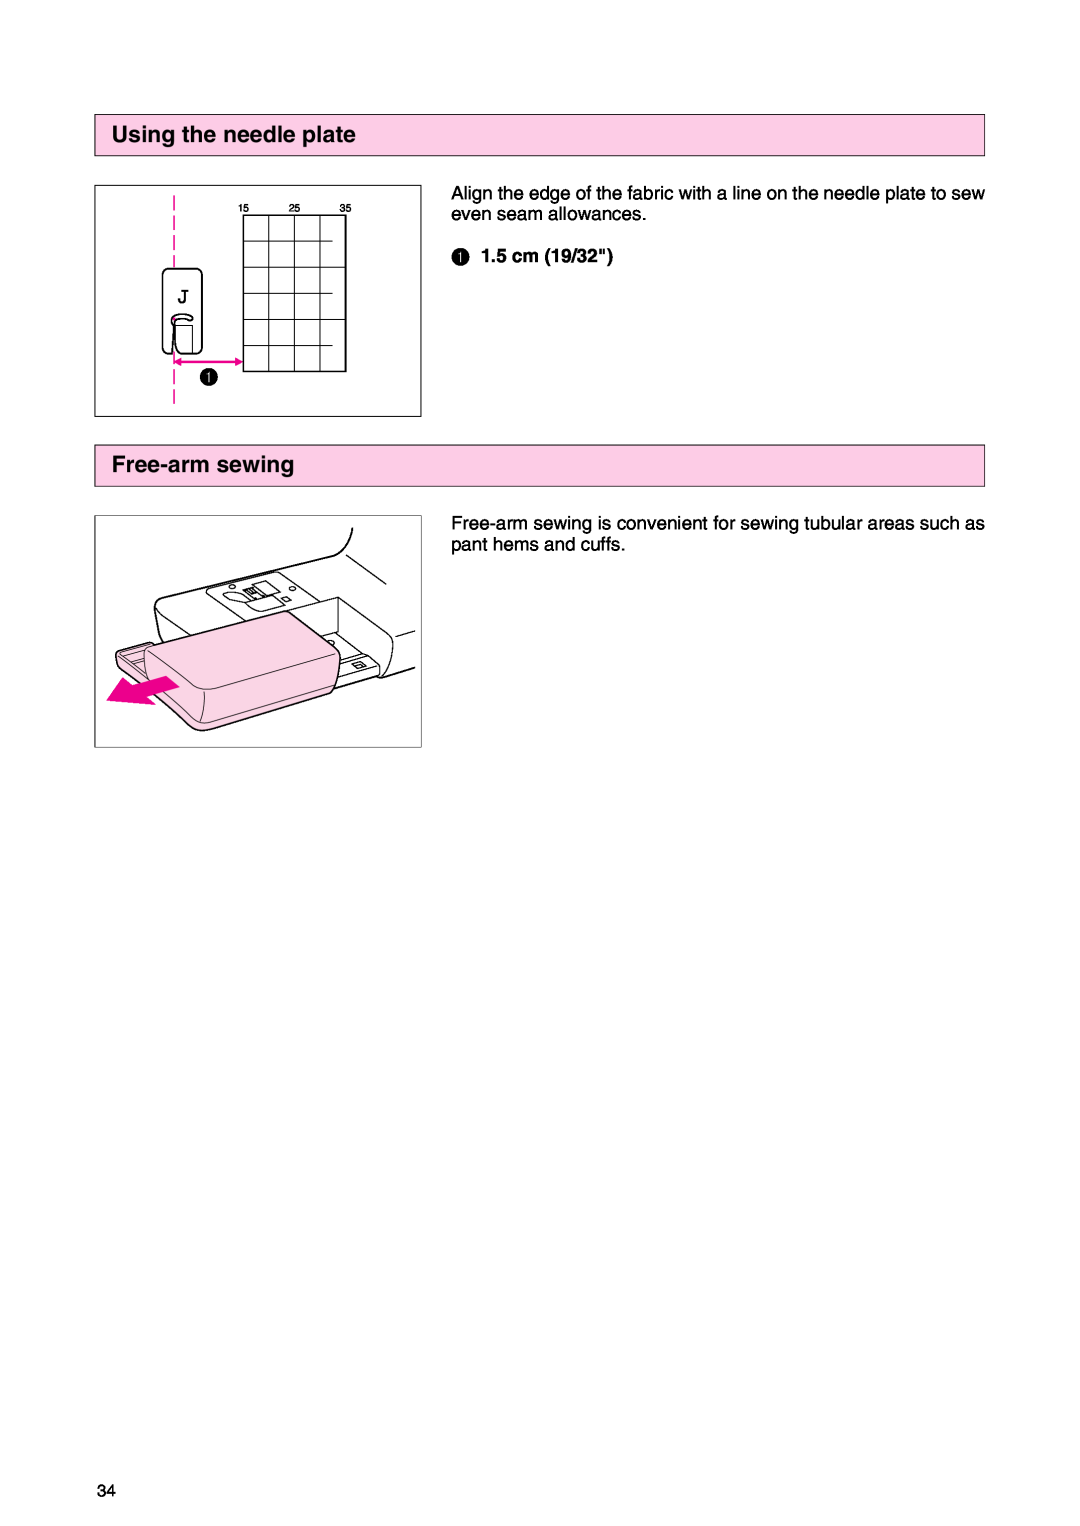 Brother PC 3000 operation manual Using the needle plate, Free-arm sewing, 1 1.5 cm 19/32 